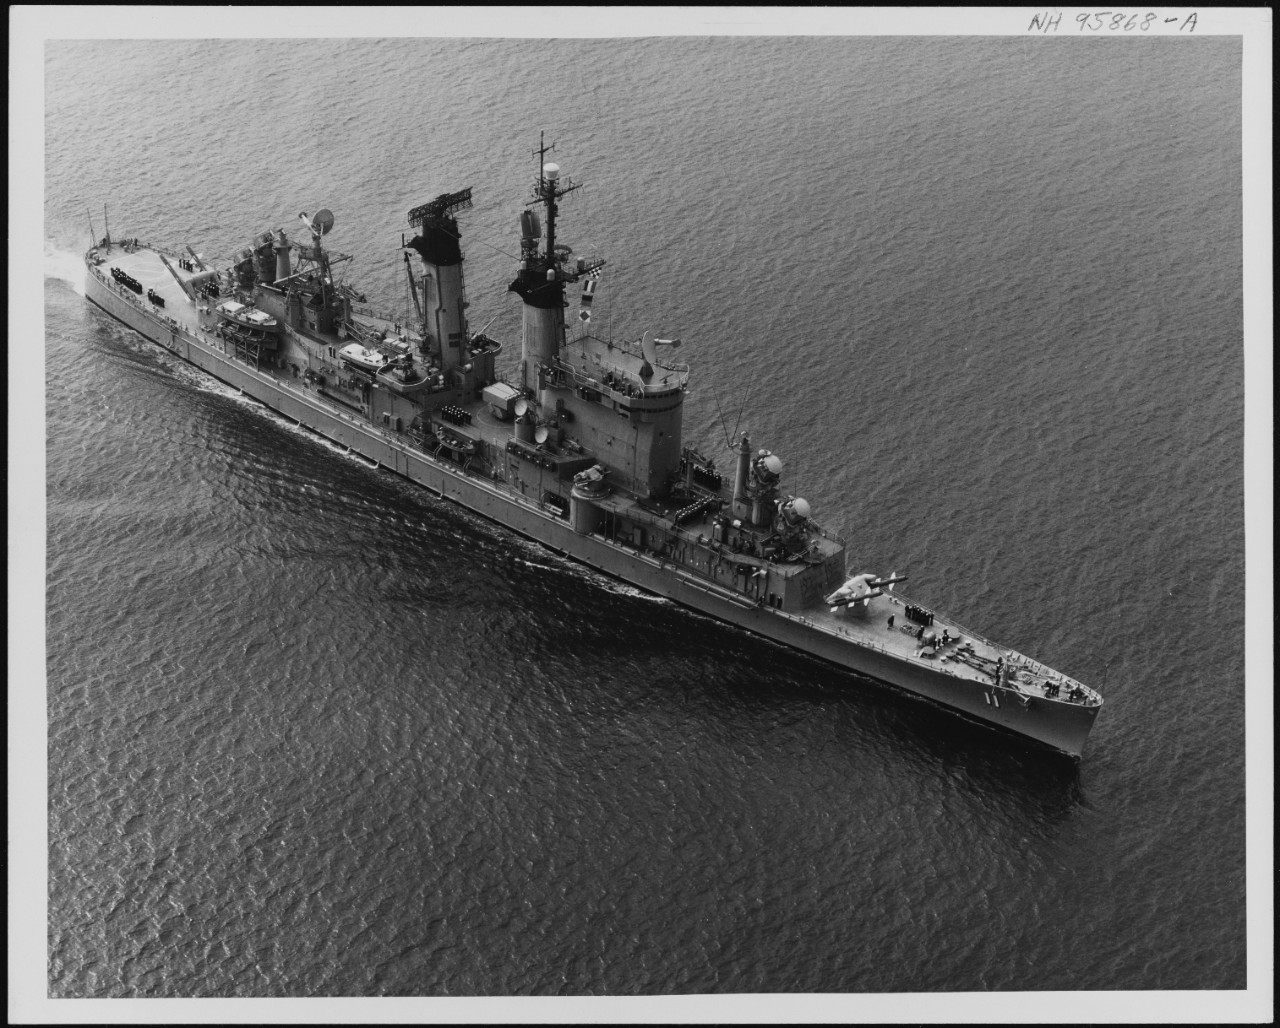 Photo #: NH 95868-A  USS Chicago